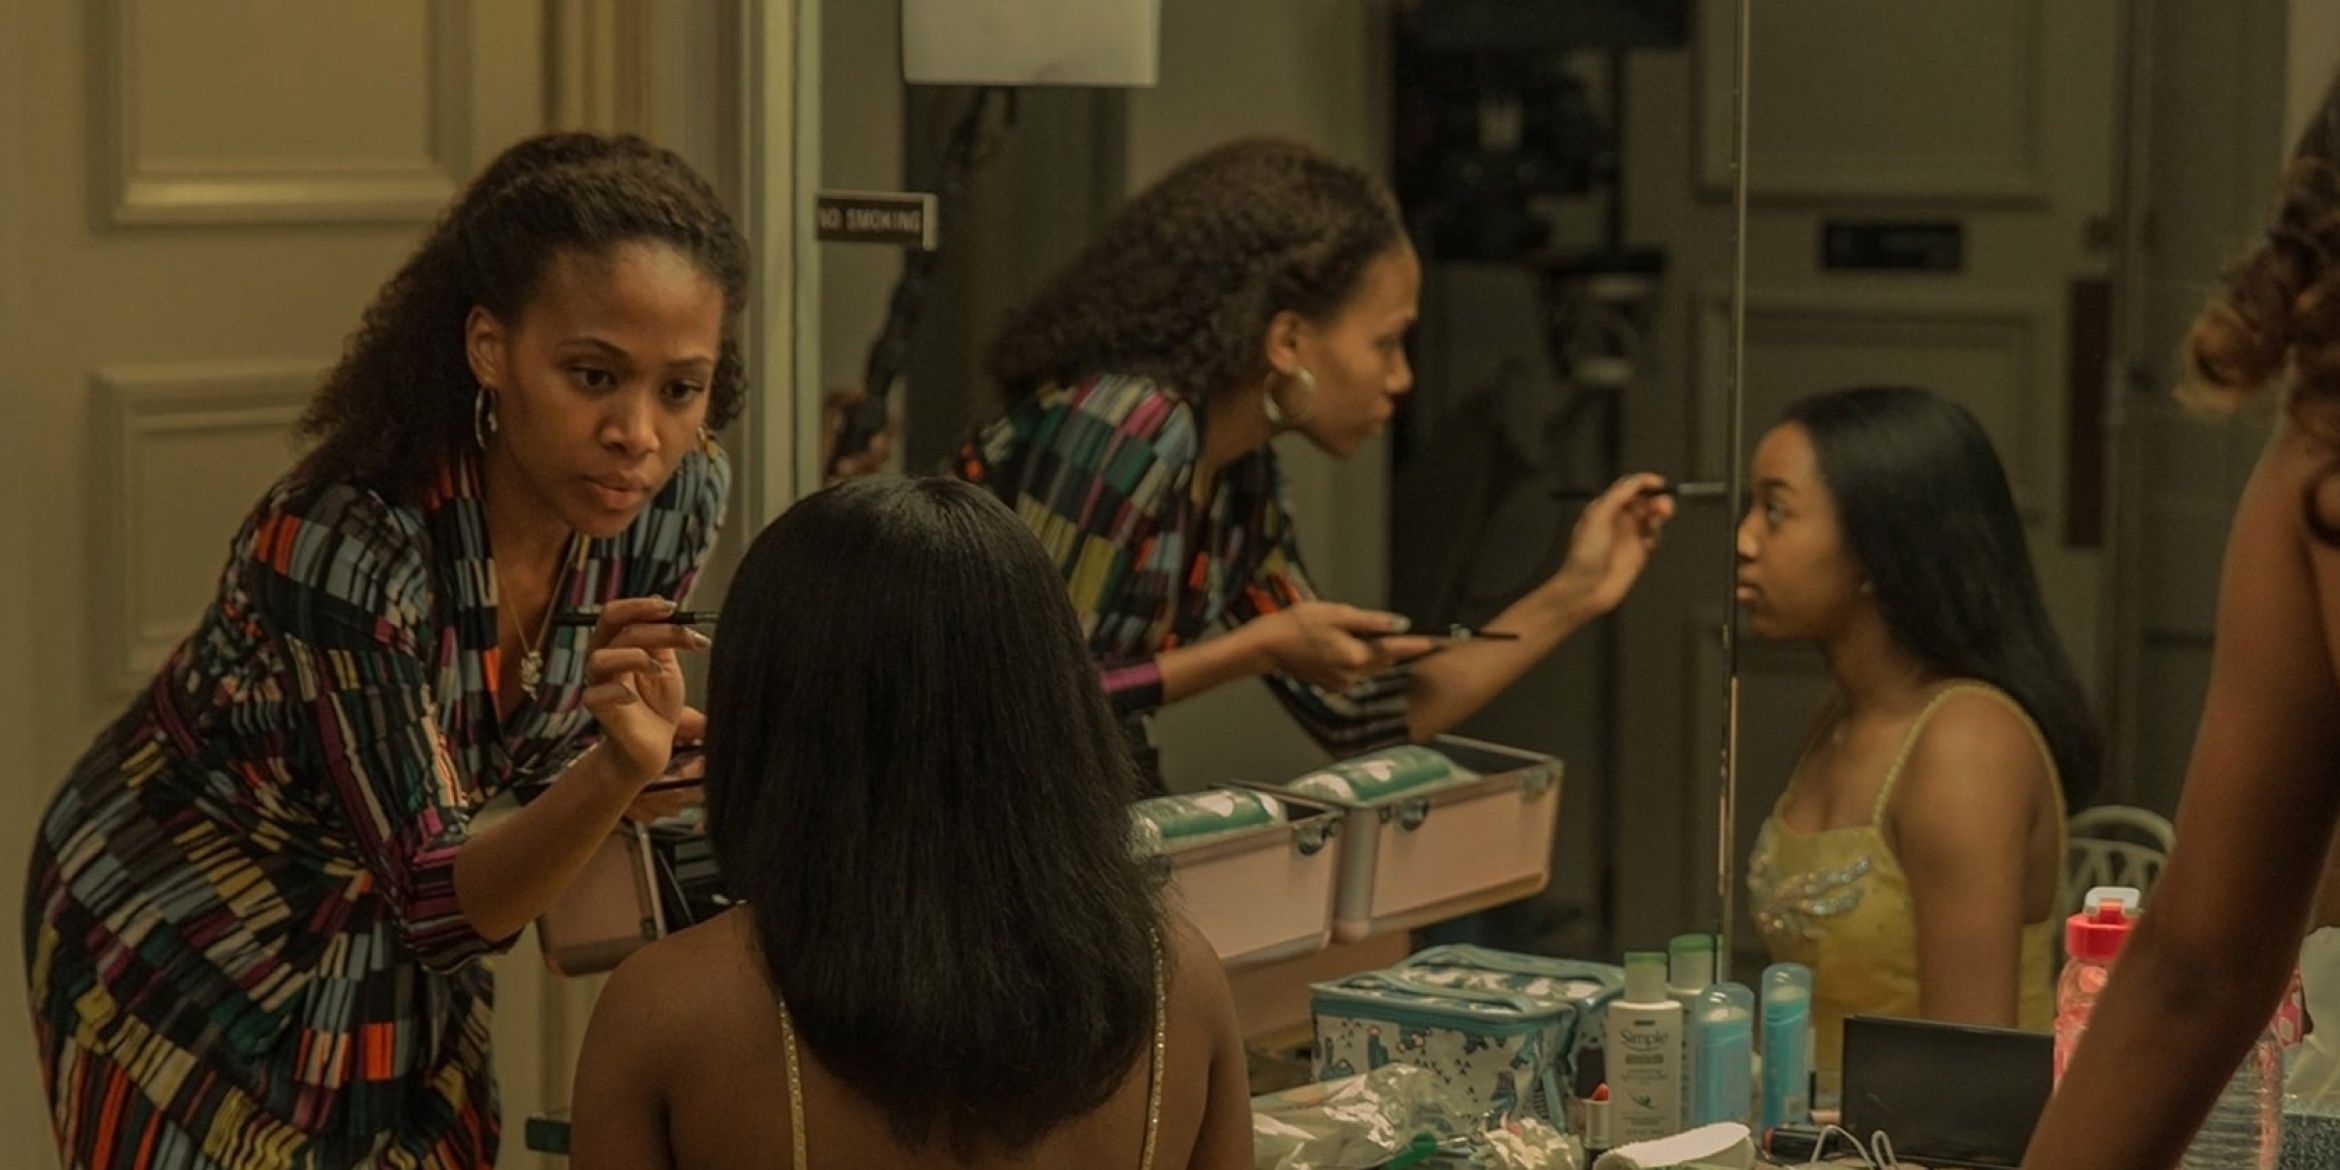 Nicole Beharie in Miss Juneteenth applying makeup to her daughter, played by Alexis Chikaeze